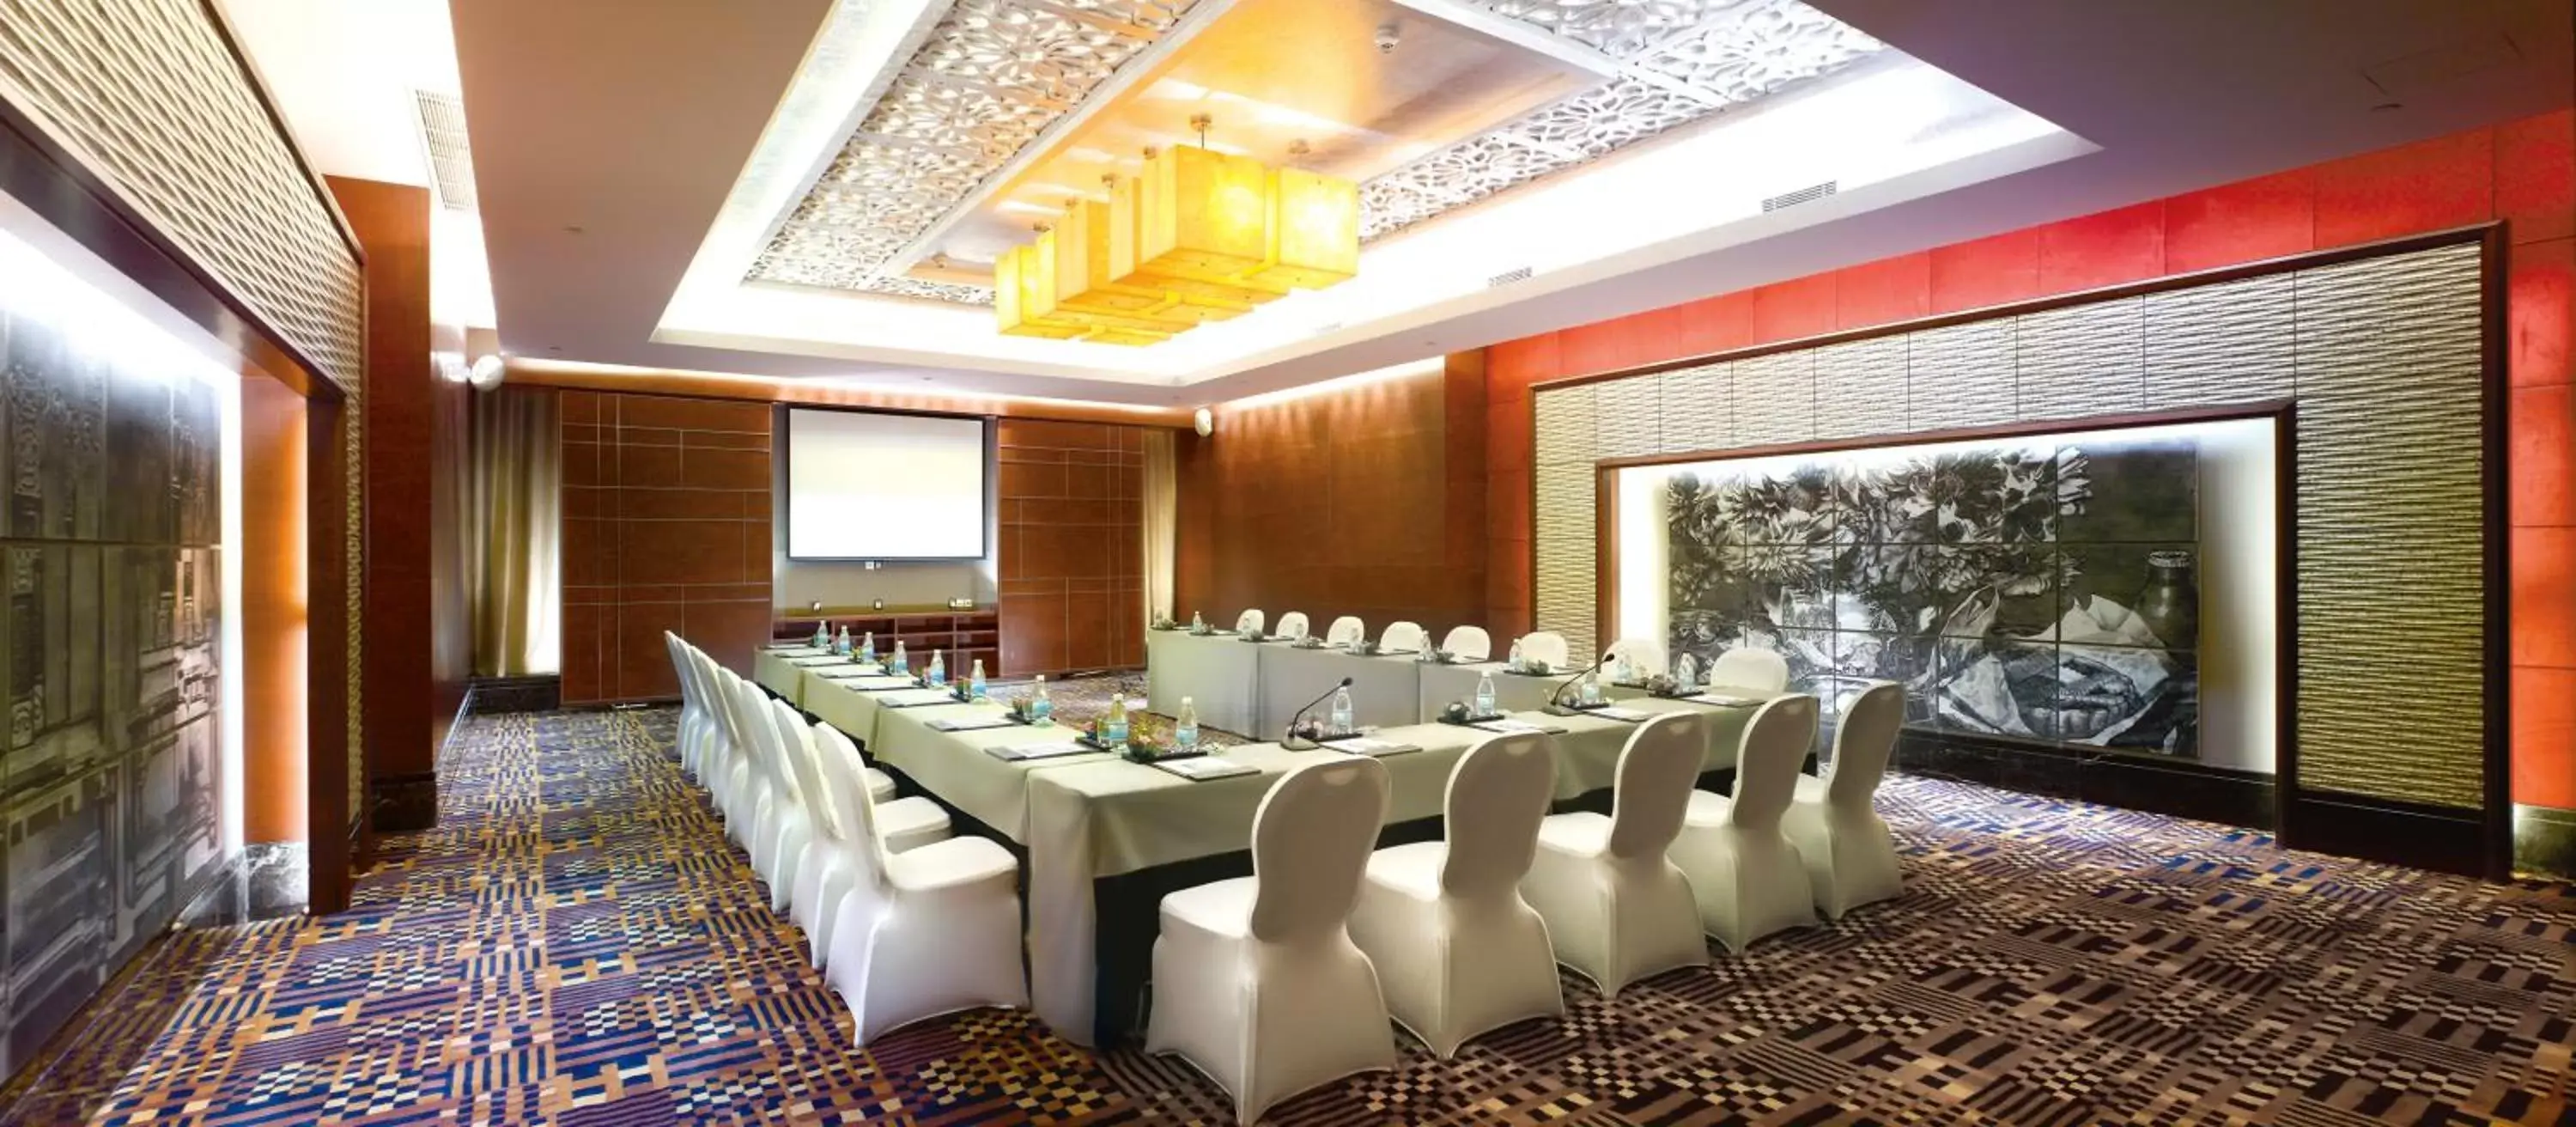 Banquet/Function facilities in Glenview ITC Plaza Chongqing